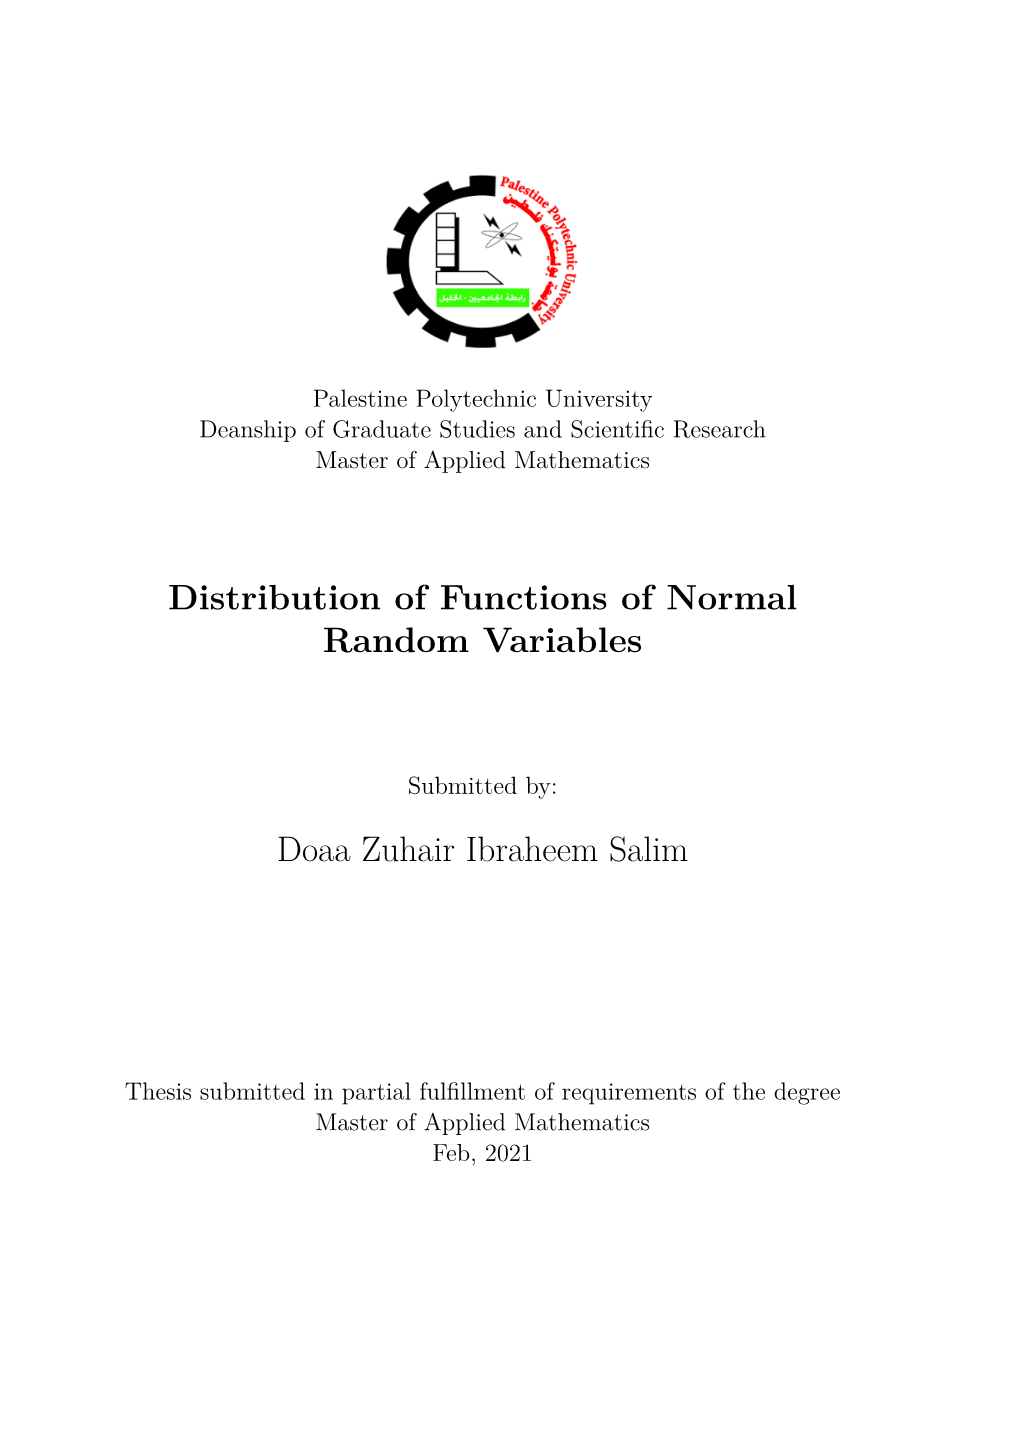 Distribution of Functions of Normal Random Variables Doaa Zuhair